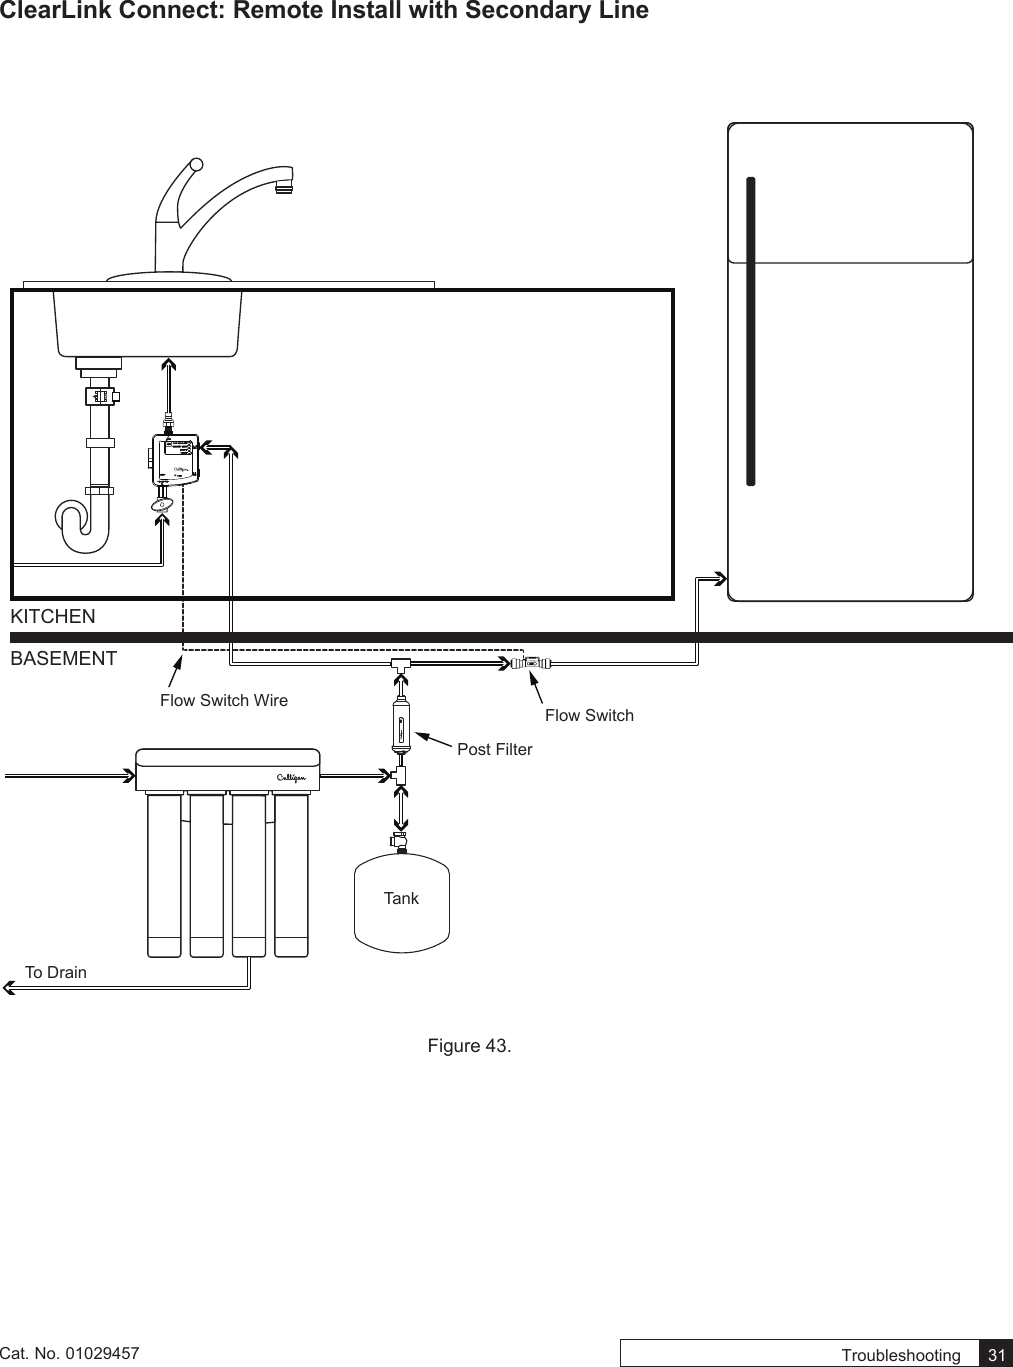 Troubleshooting    31Cat. No. 01029457ClearLink Connect: Remote Install with Secondary LineKITCHENBASEMENTFlow SwitchFlow Switch WireTo DrainPost FilterTankFigure 43. 